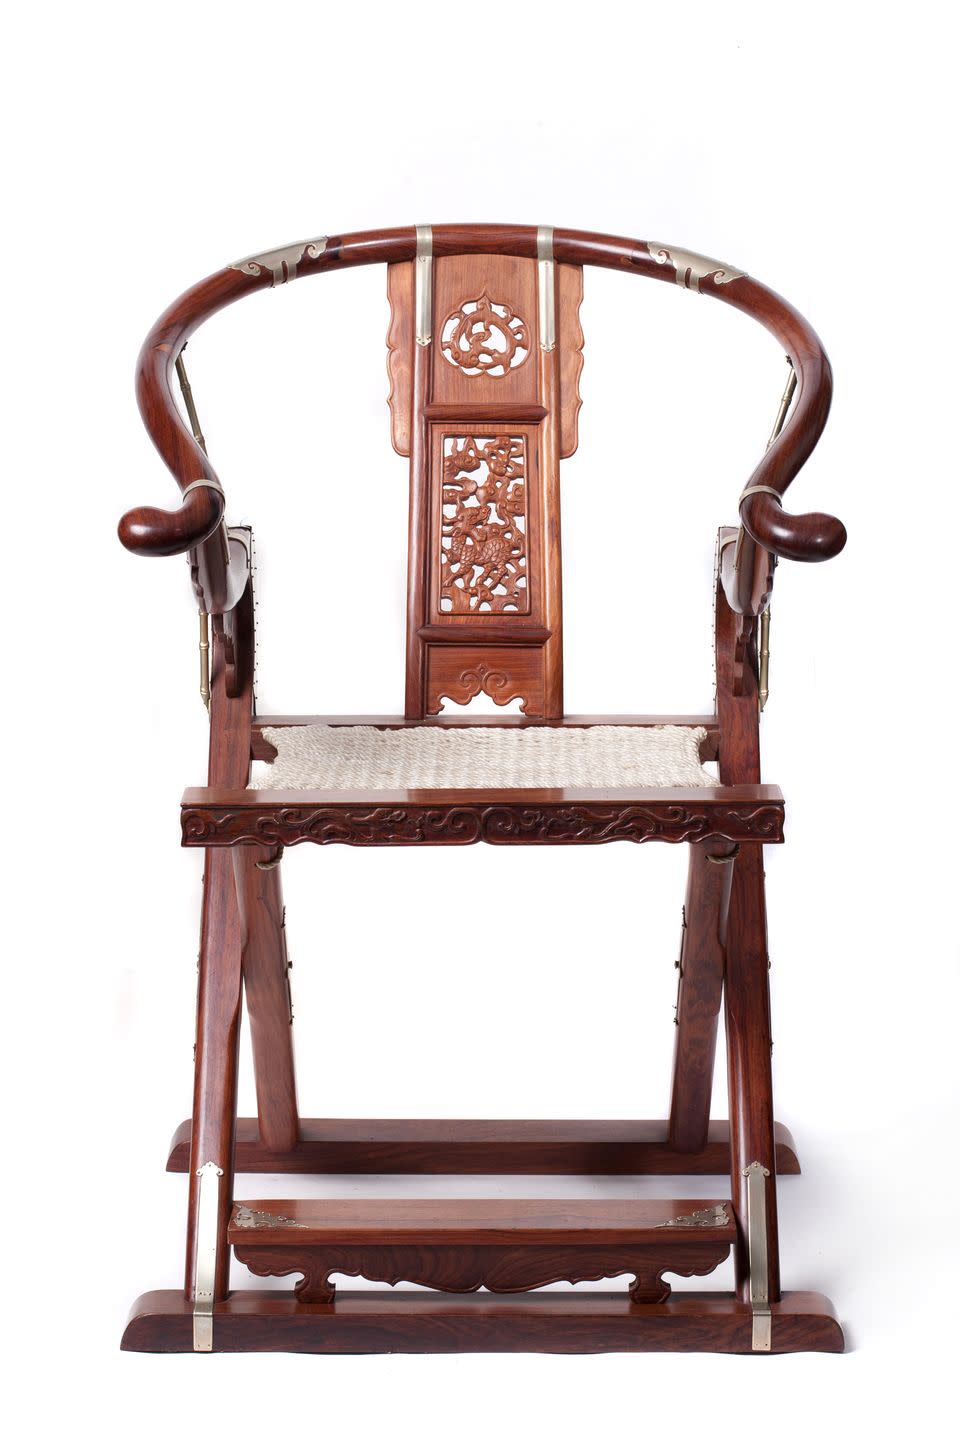 3) Ming Chair